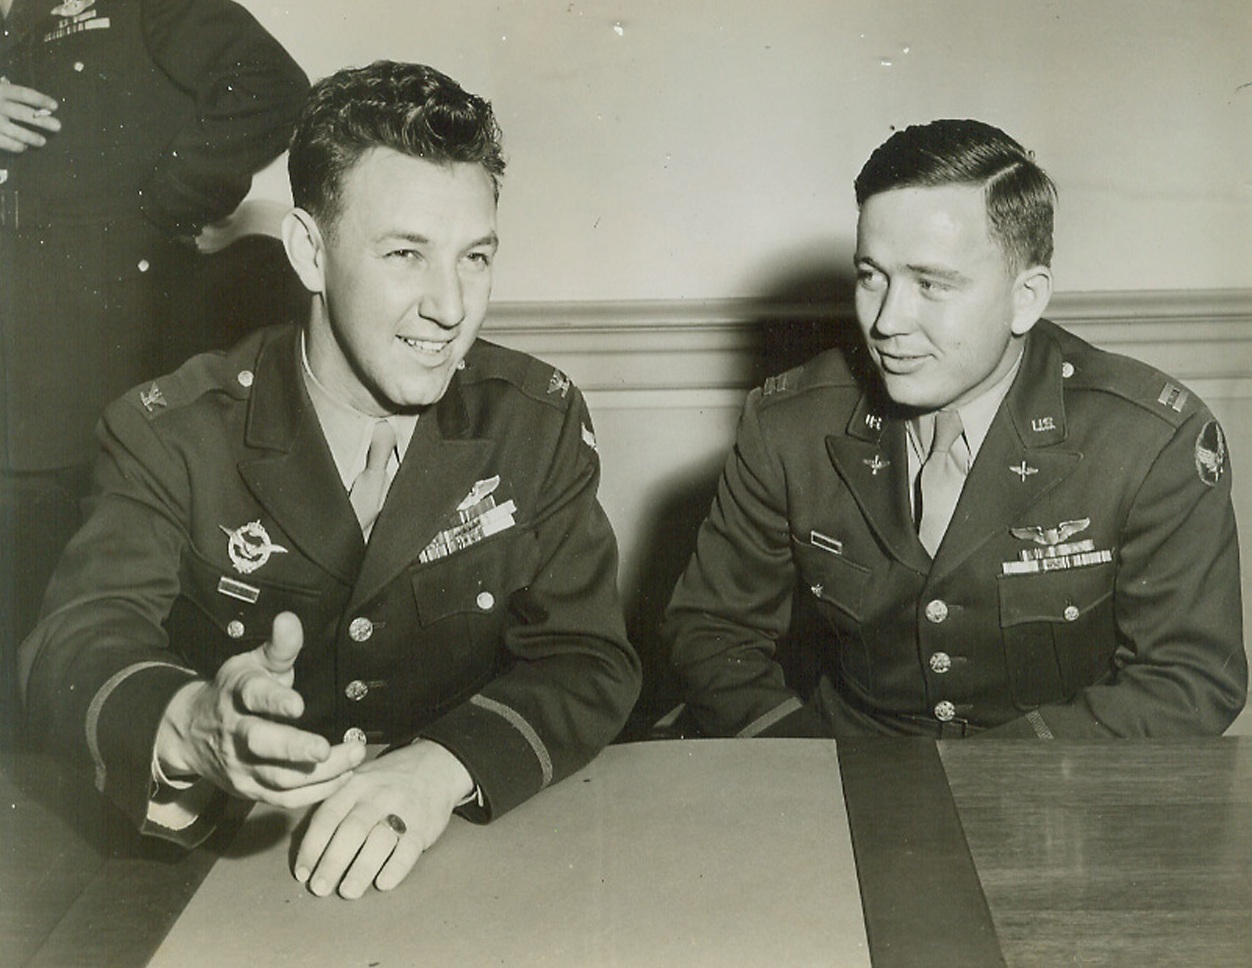 No Title. 2/24/1944. Col. Keith Compson, left, commanding officer of a B-24 heavy bombardment group now operating in the Mediterranean theater, and Capt. Daniel B. Orr, right, operations officer in the group, who combined have compiled a record of almost 700 hours of operational combat flying, are shown during a press conference at the Pentagon Building today. Col Compton, 28, is of St. Joseph, Mo., and Capt. Orr who is 24, is from Graham, Texas.  Credit: ACME.;